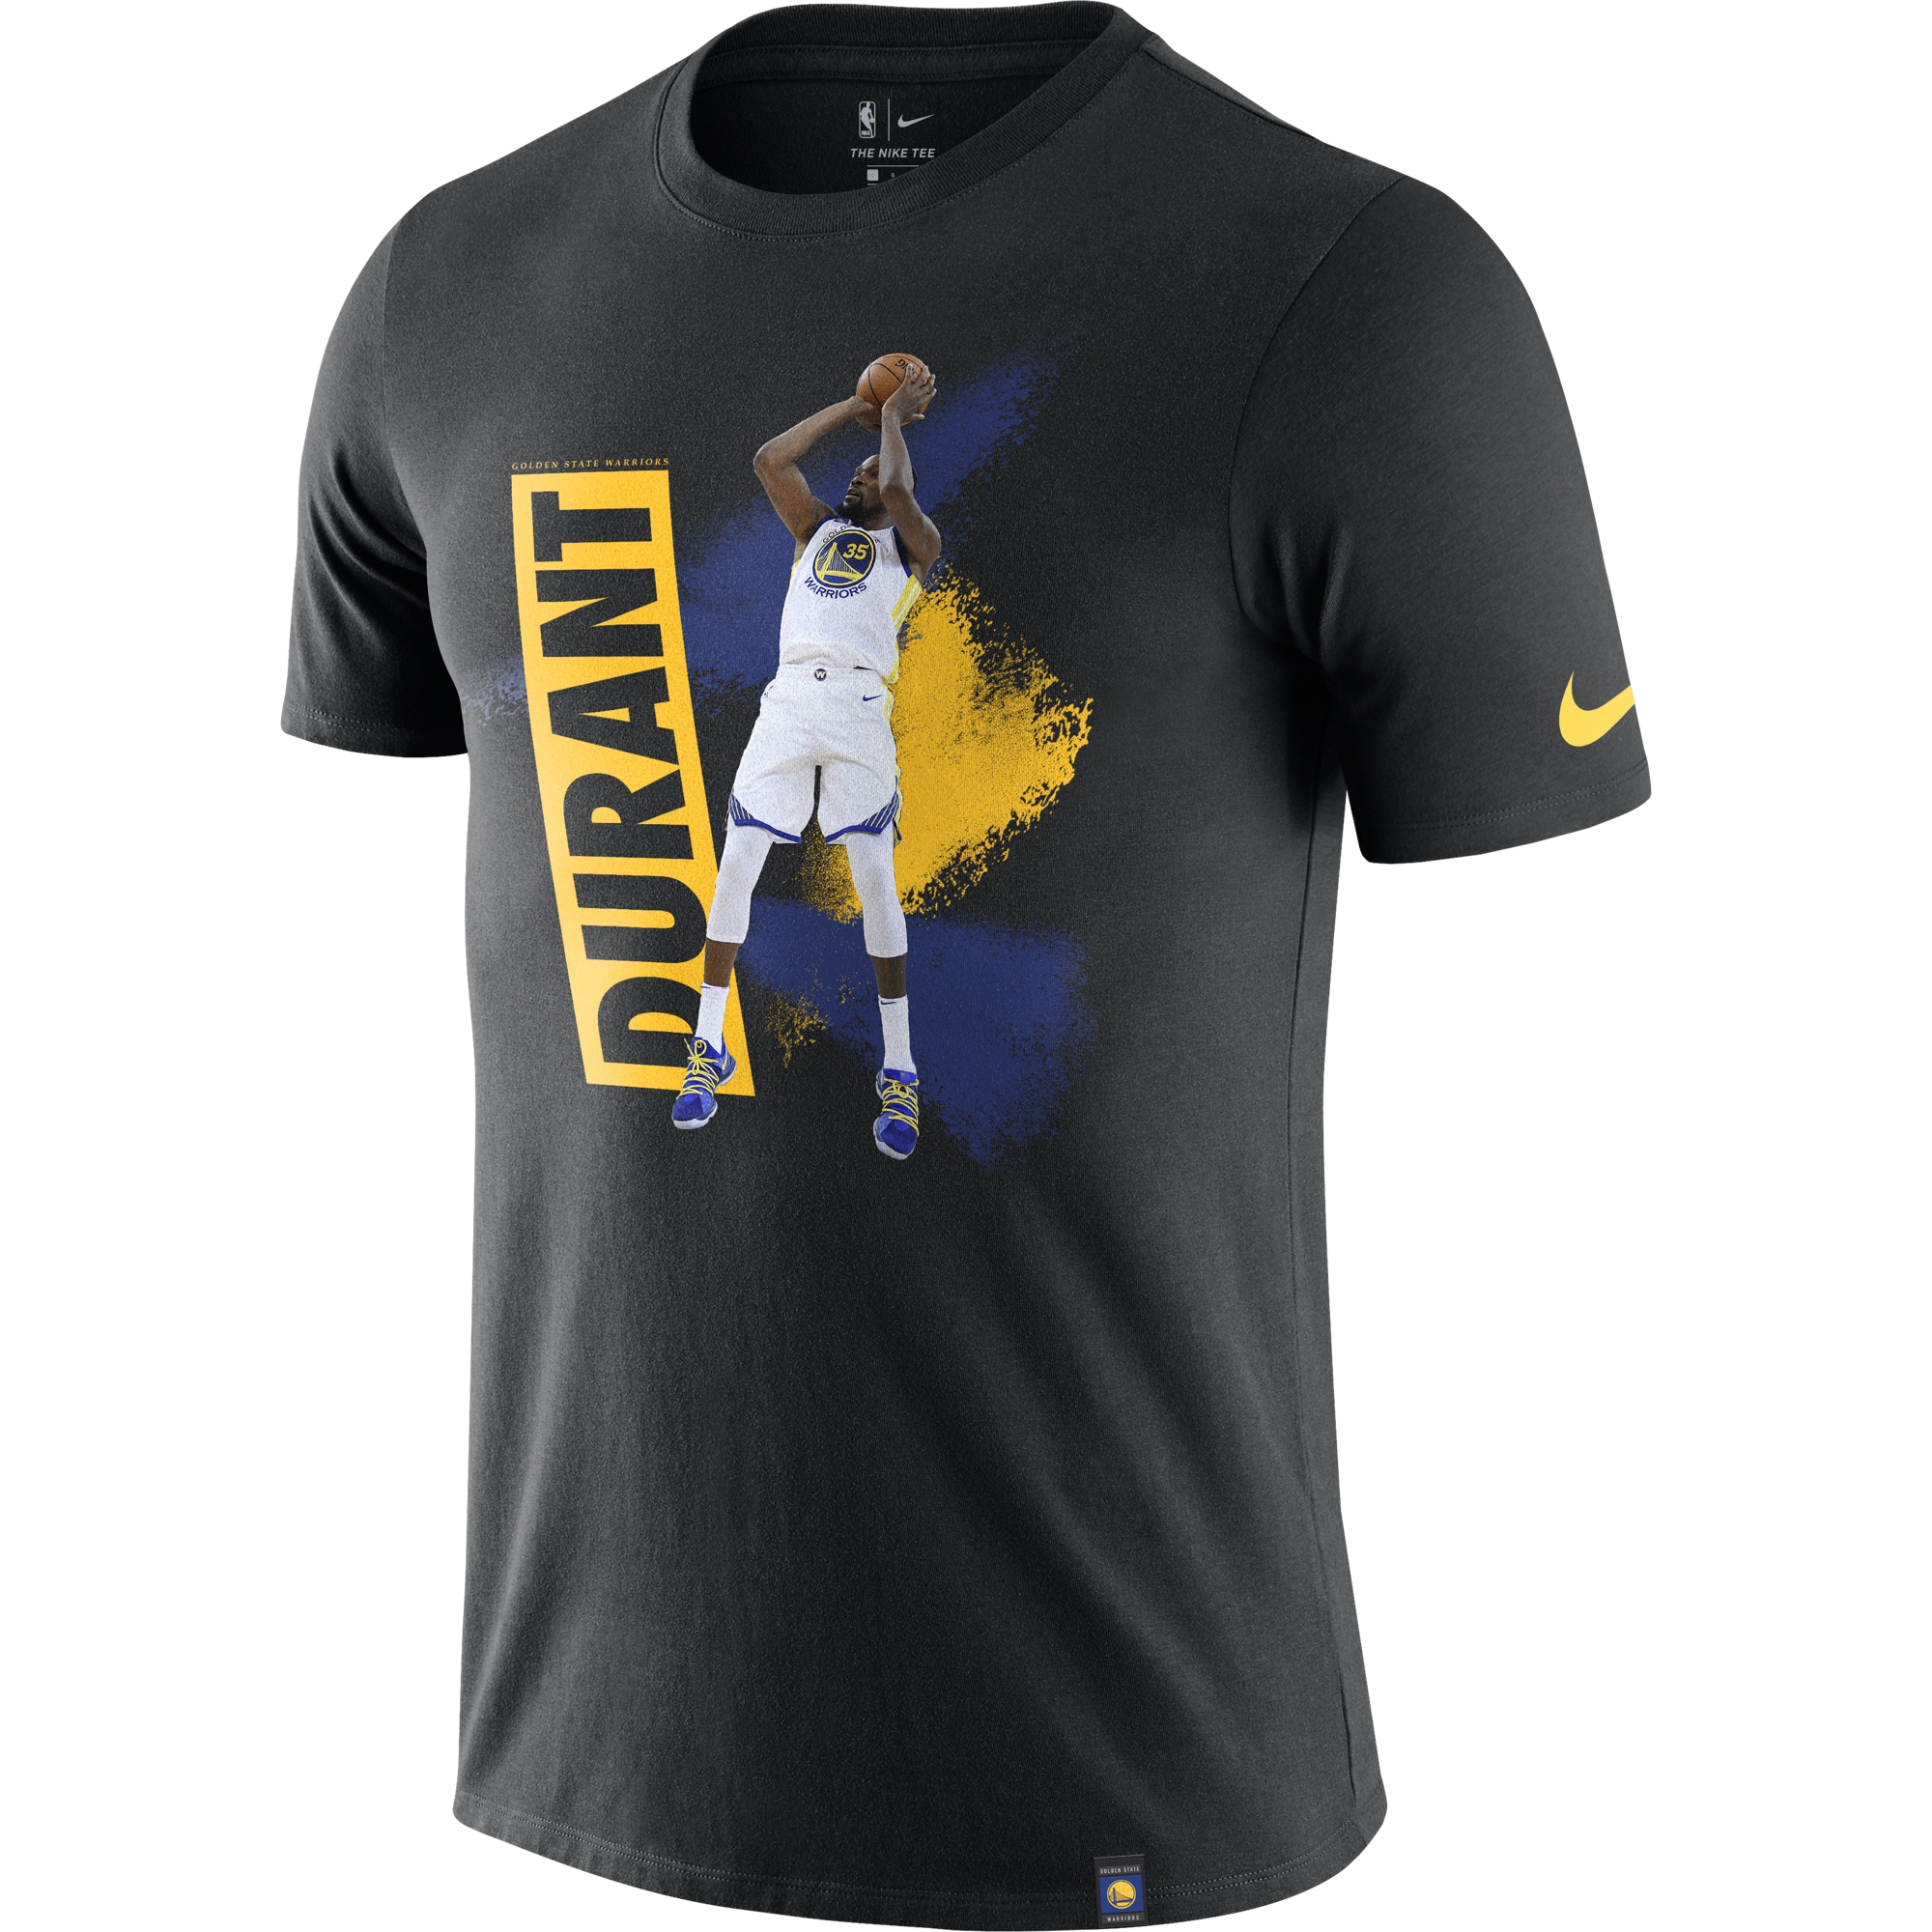 NIKE NBA GOLDEN STATE WARRIORS KEVIN DURANT DRY TEE BLACK